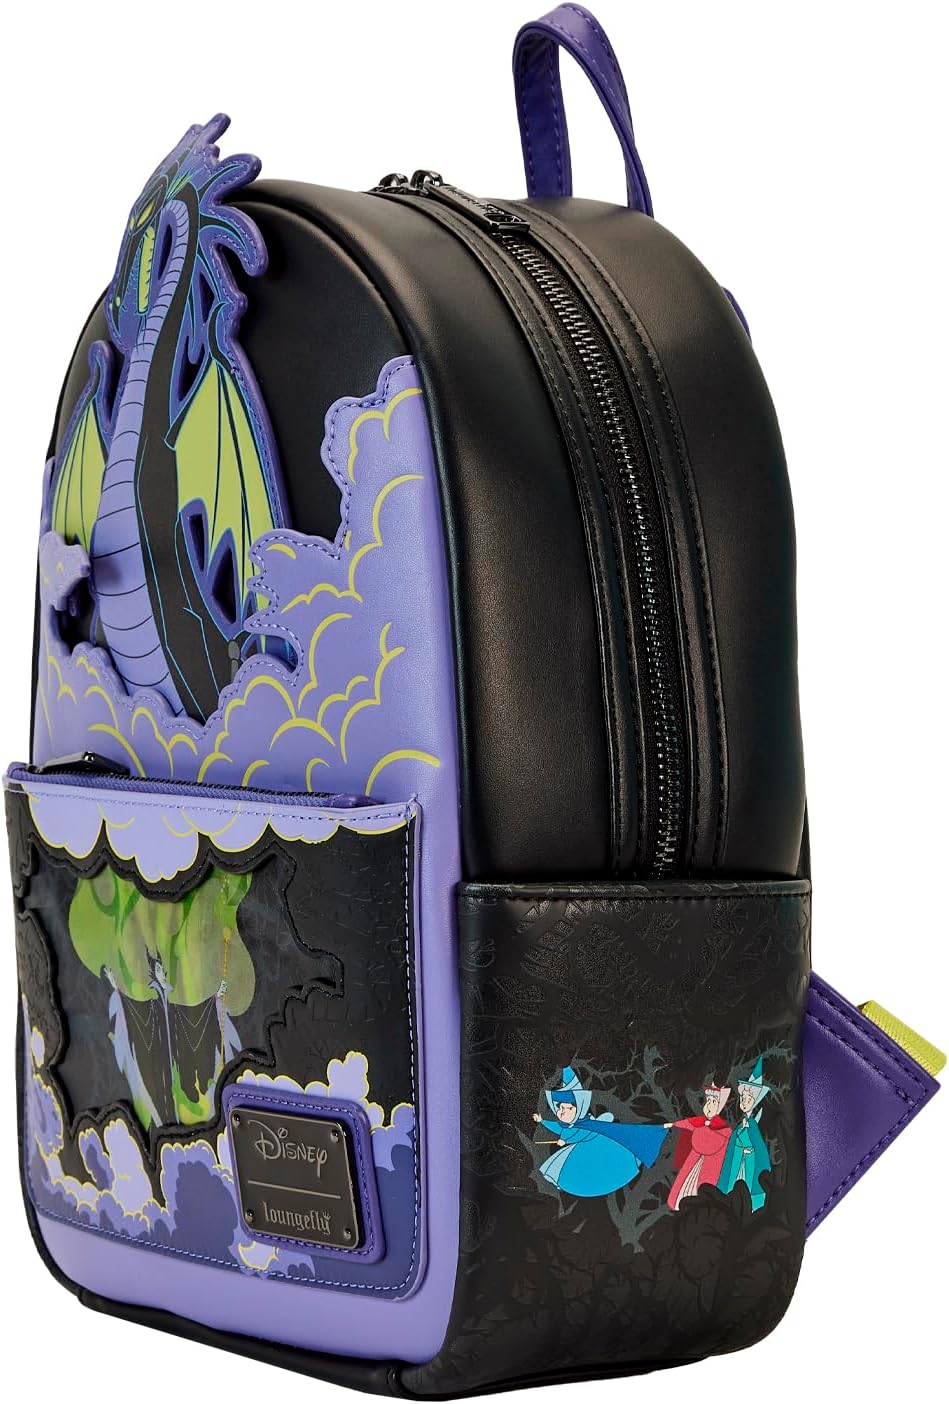 maleficent loungefly backpack - AllEars.Net